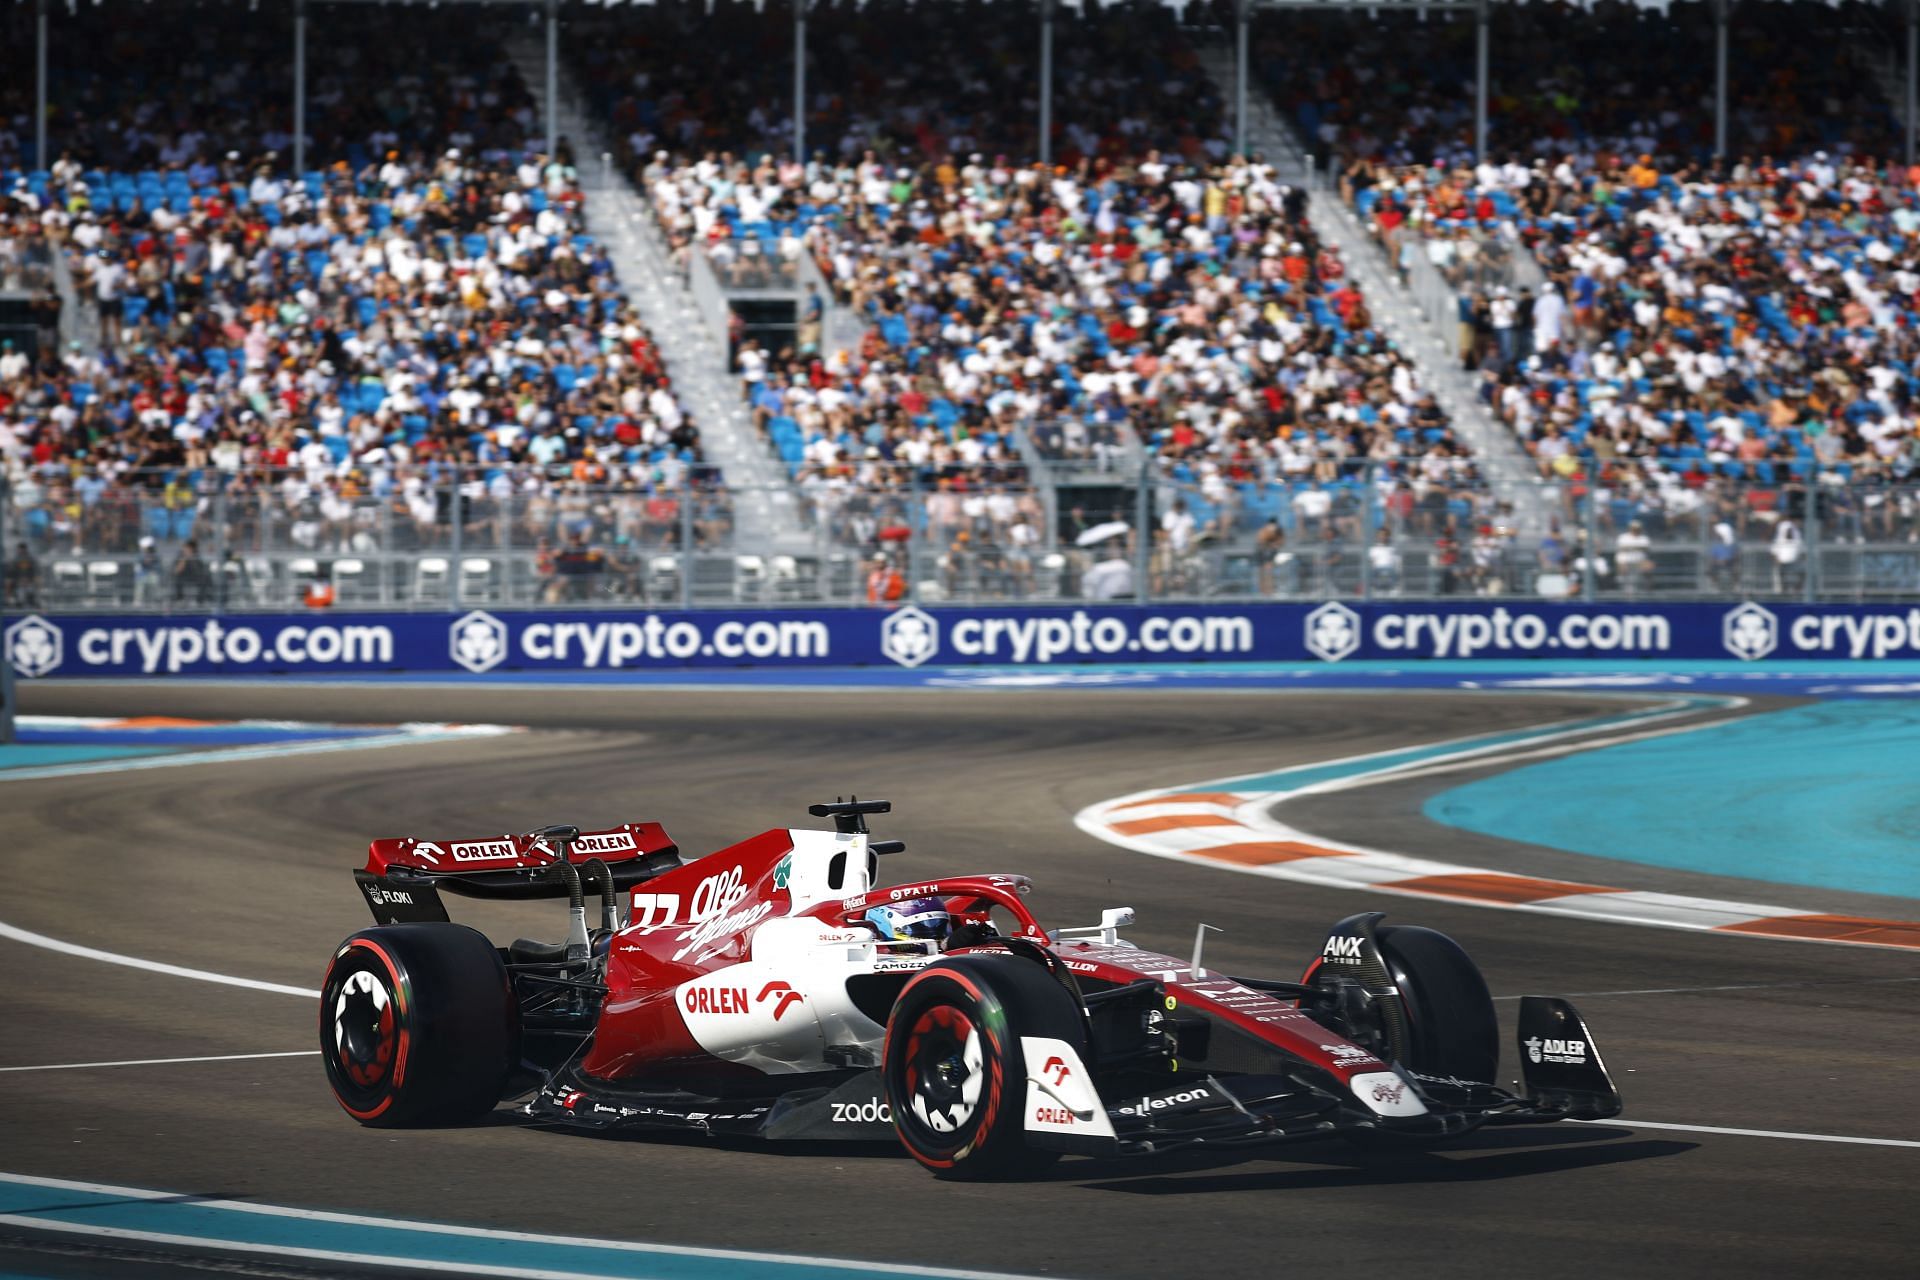 Alfa Romeo driver Valtteri Bottas in action during the 2022 F1 Miami GP (Photo by Chris Graythen/Getty Images)